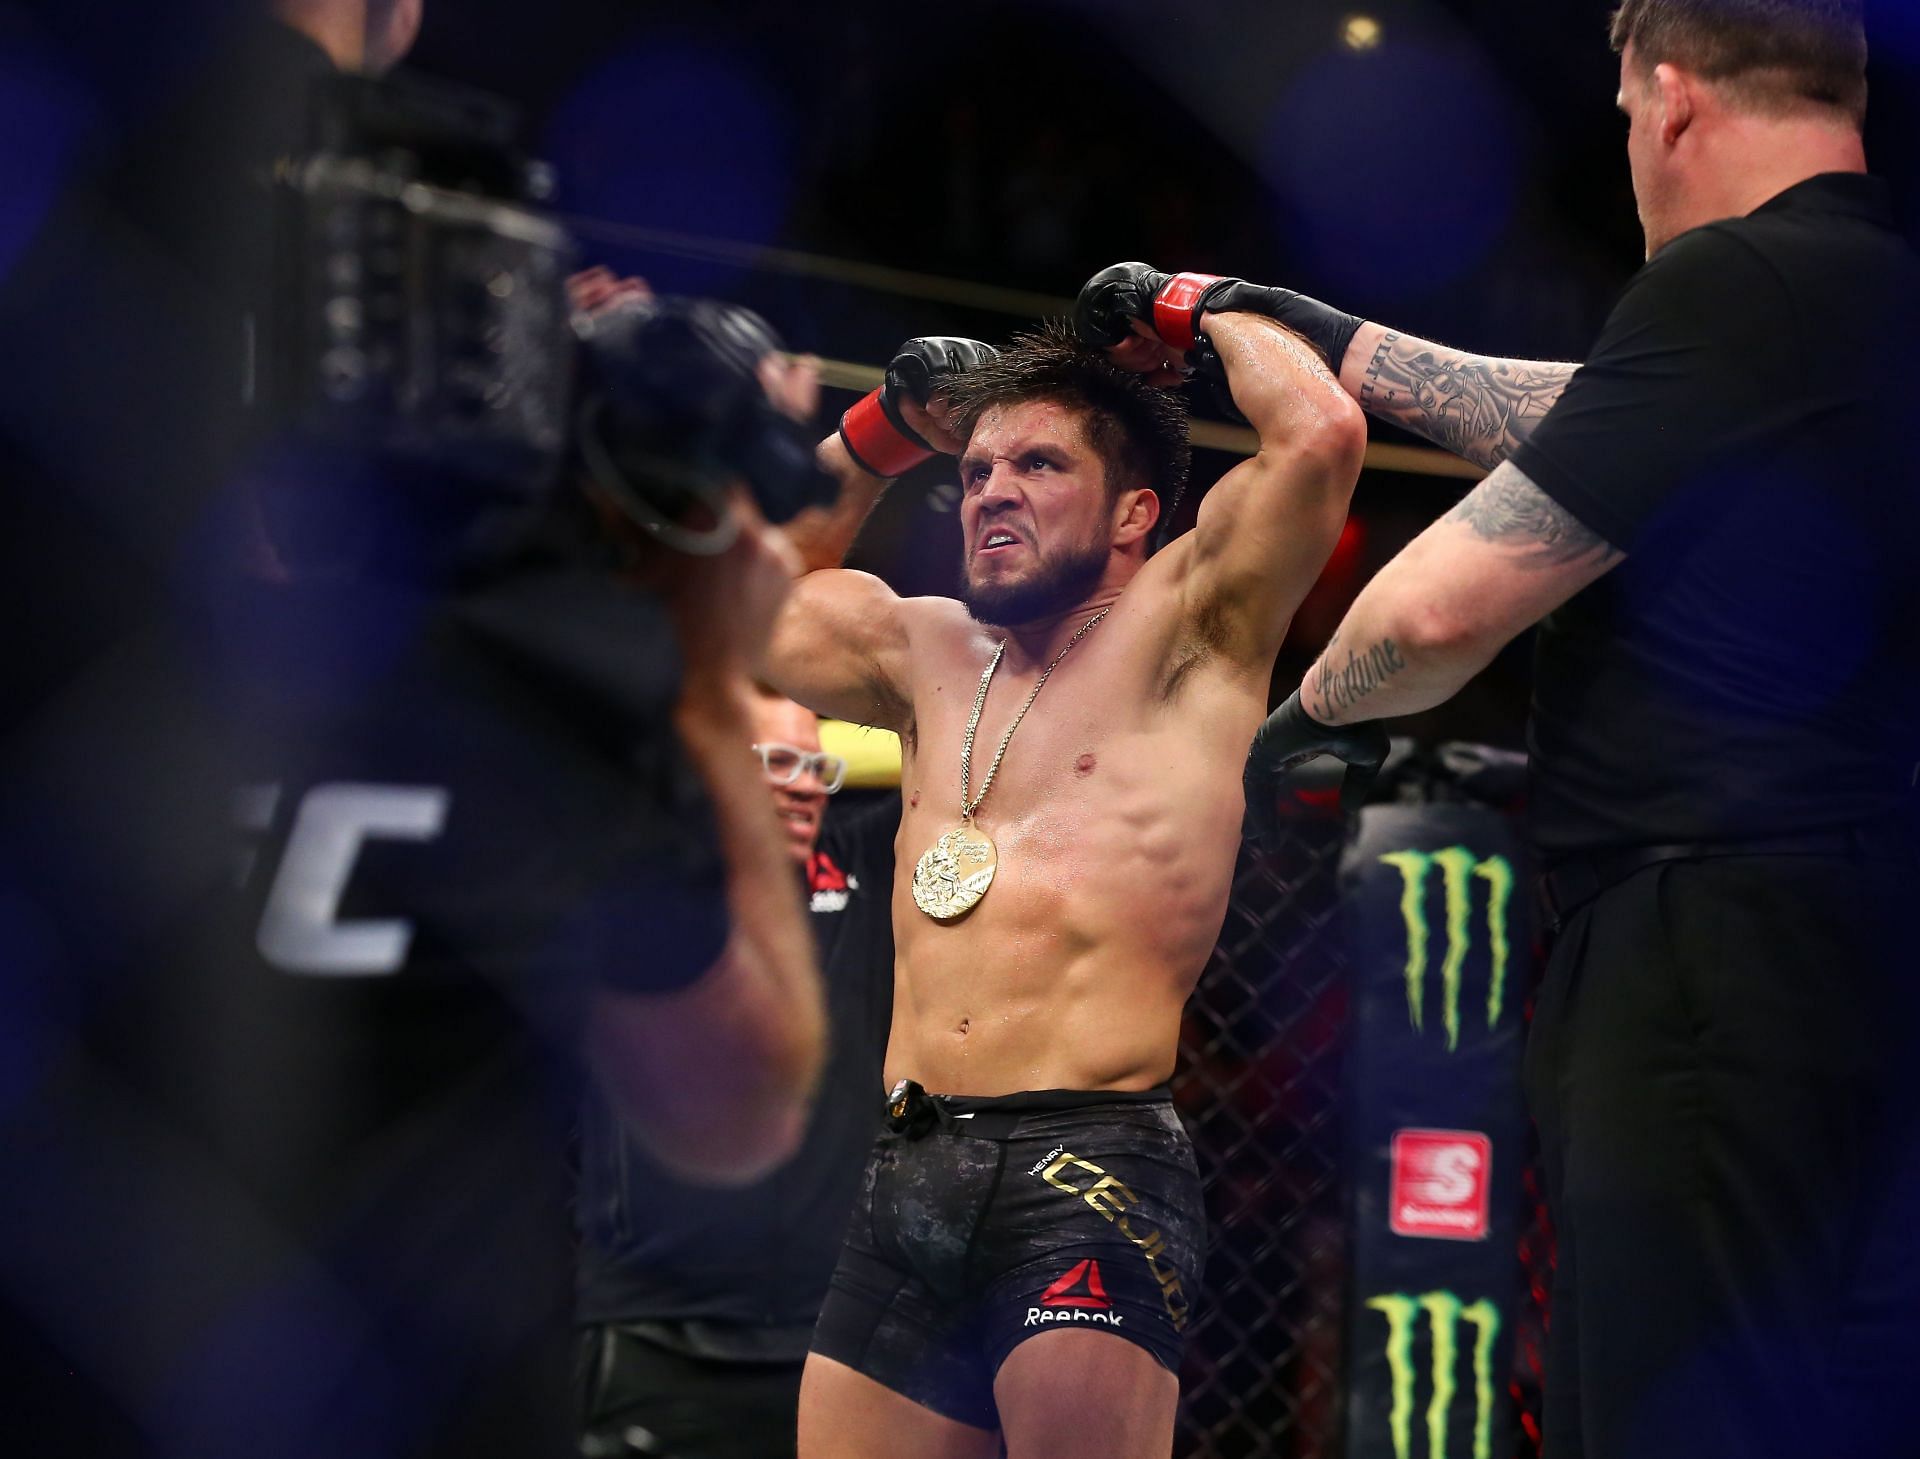 Henry Cejudo holds a professional record of 16-2